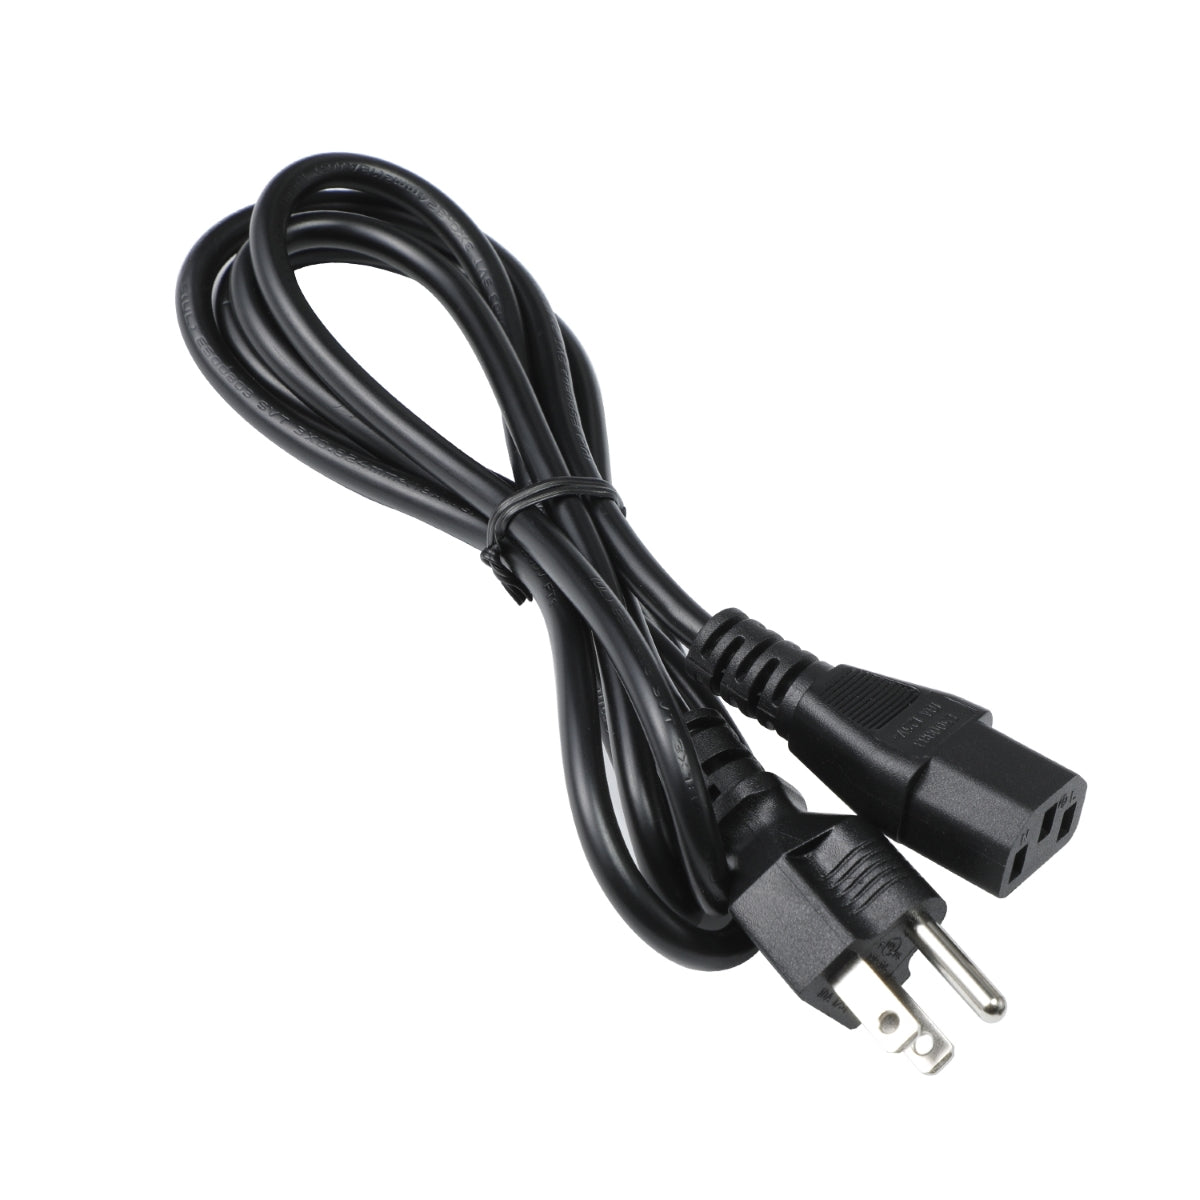 Power Cord for HP Pavilion 550-077c Computer.